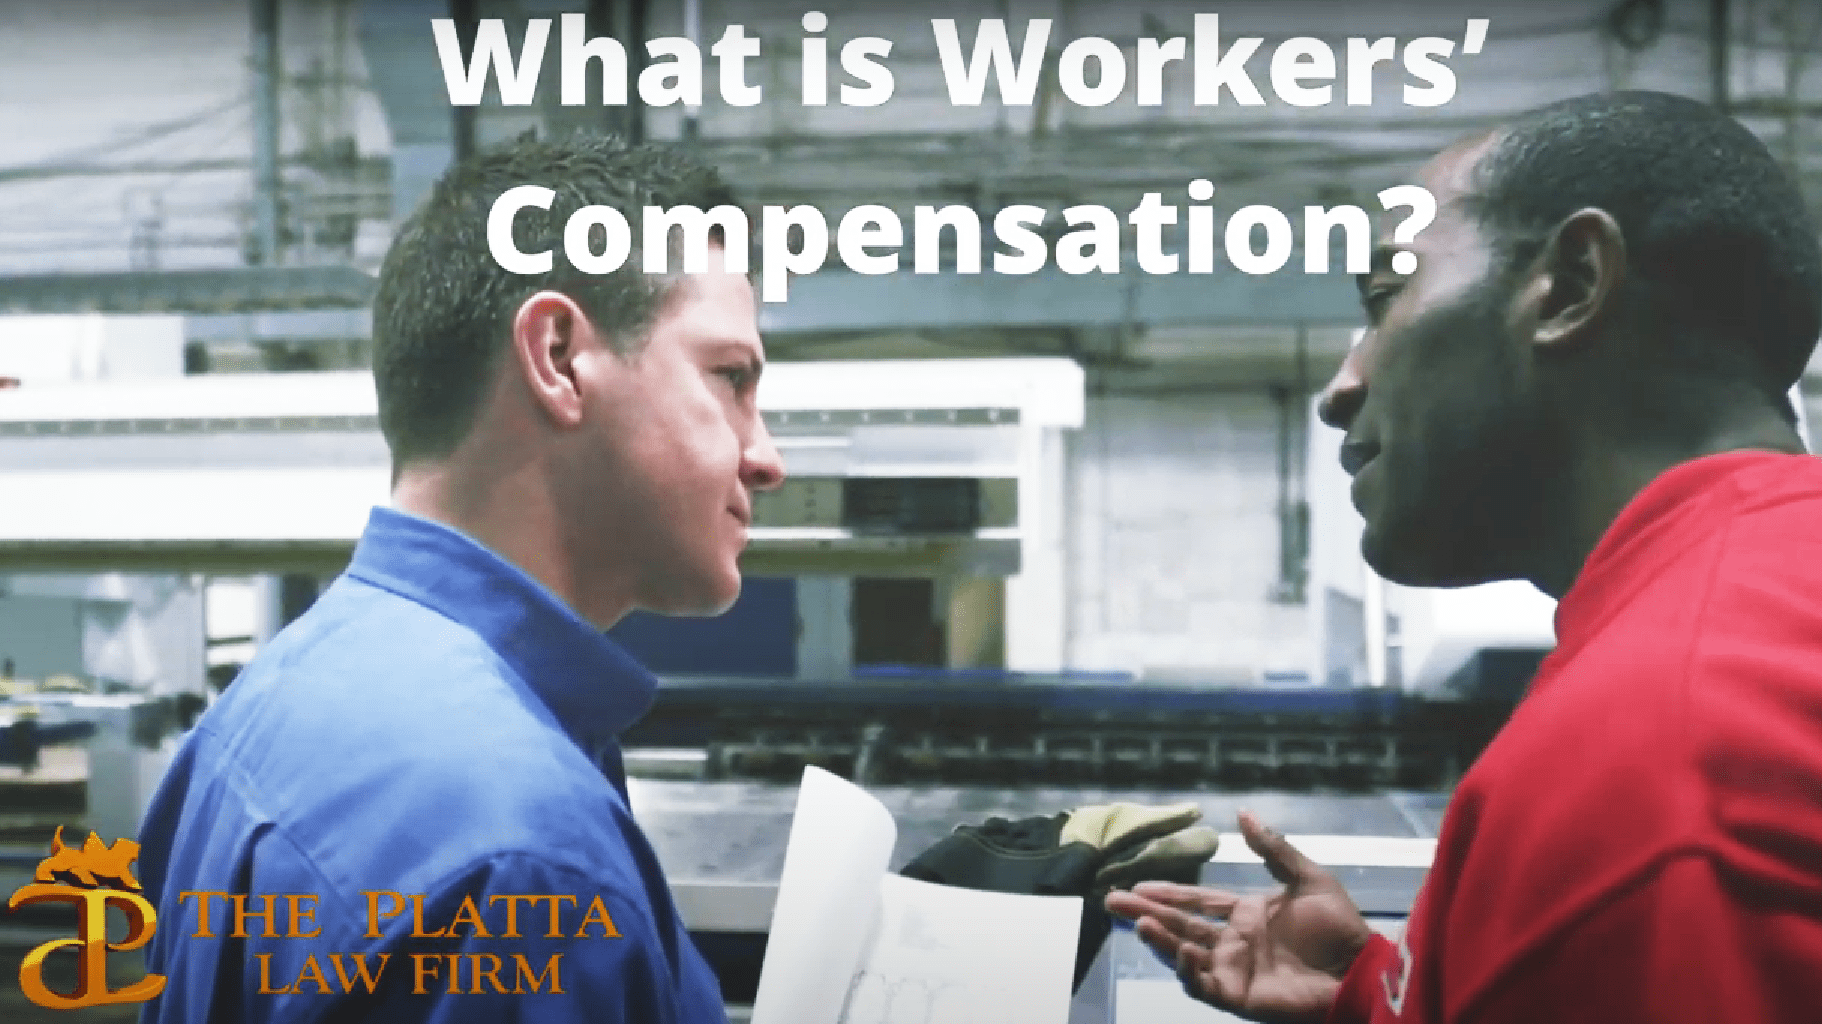 WORKERS’ COMPENSATION LAWYER New York City